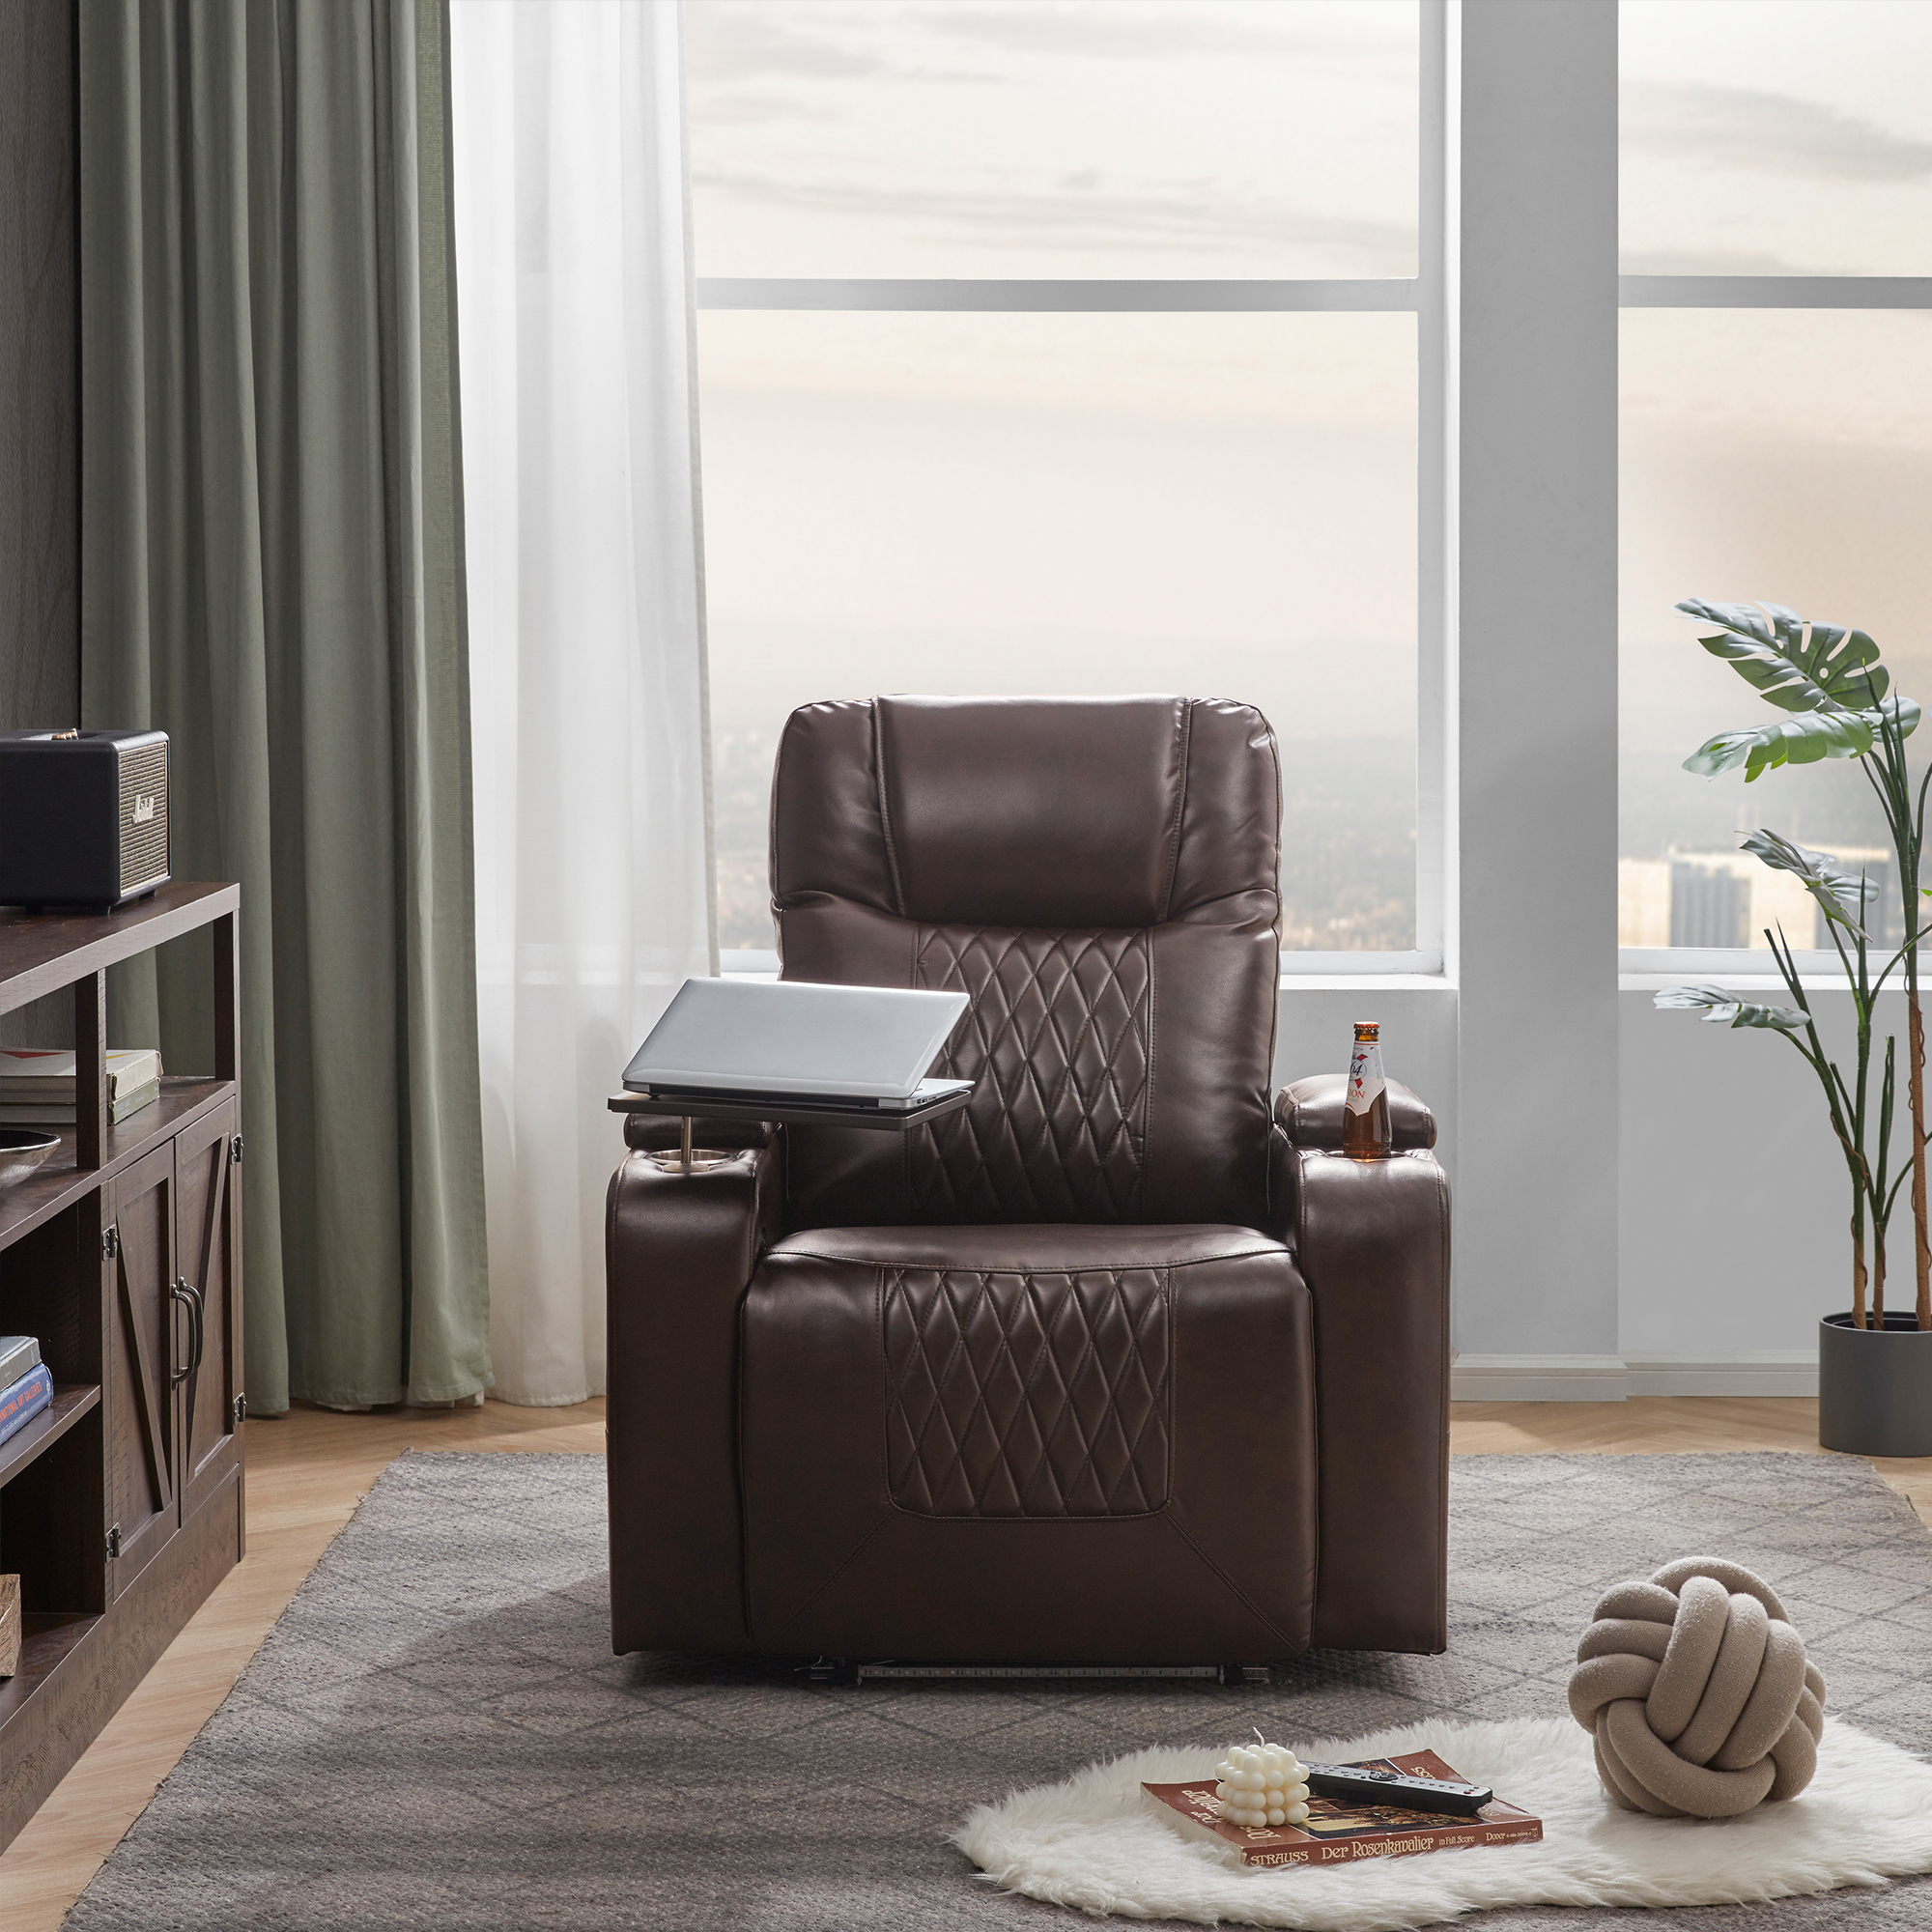 Power Recliner with USB Charging Port and Arm Storage - SG000630AAD